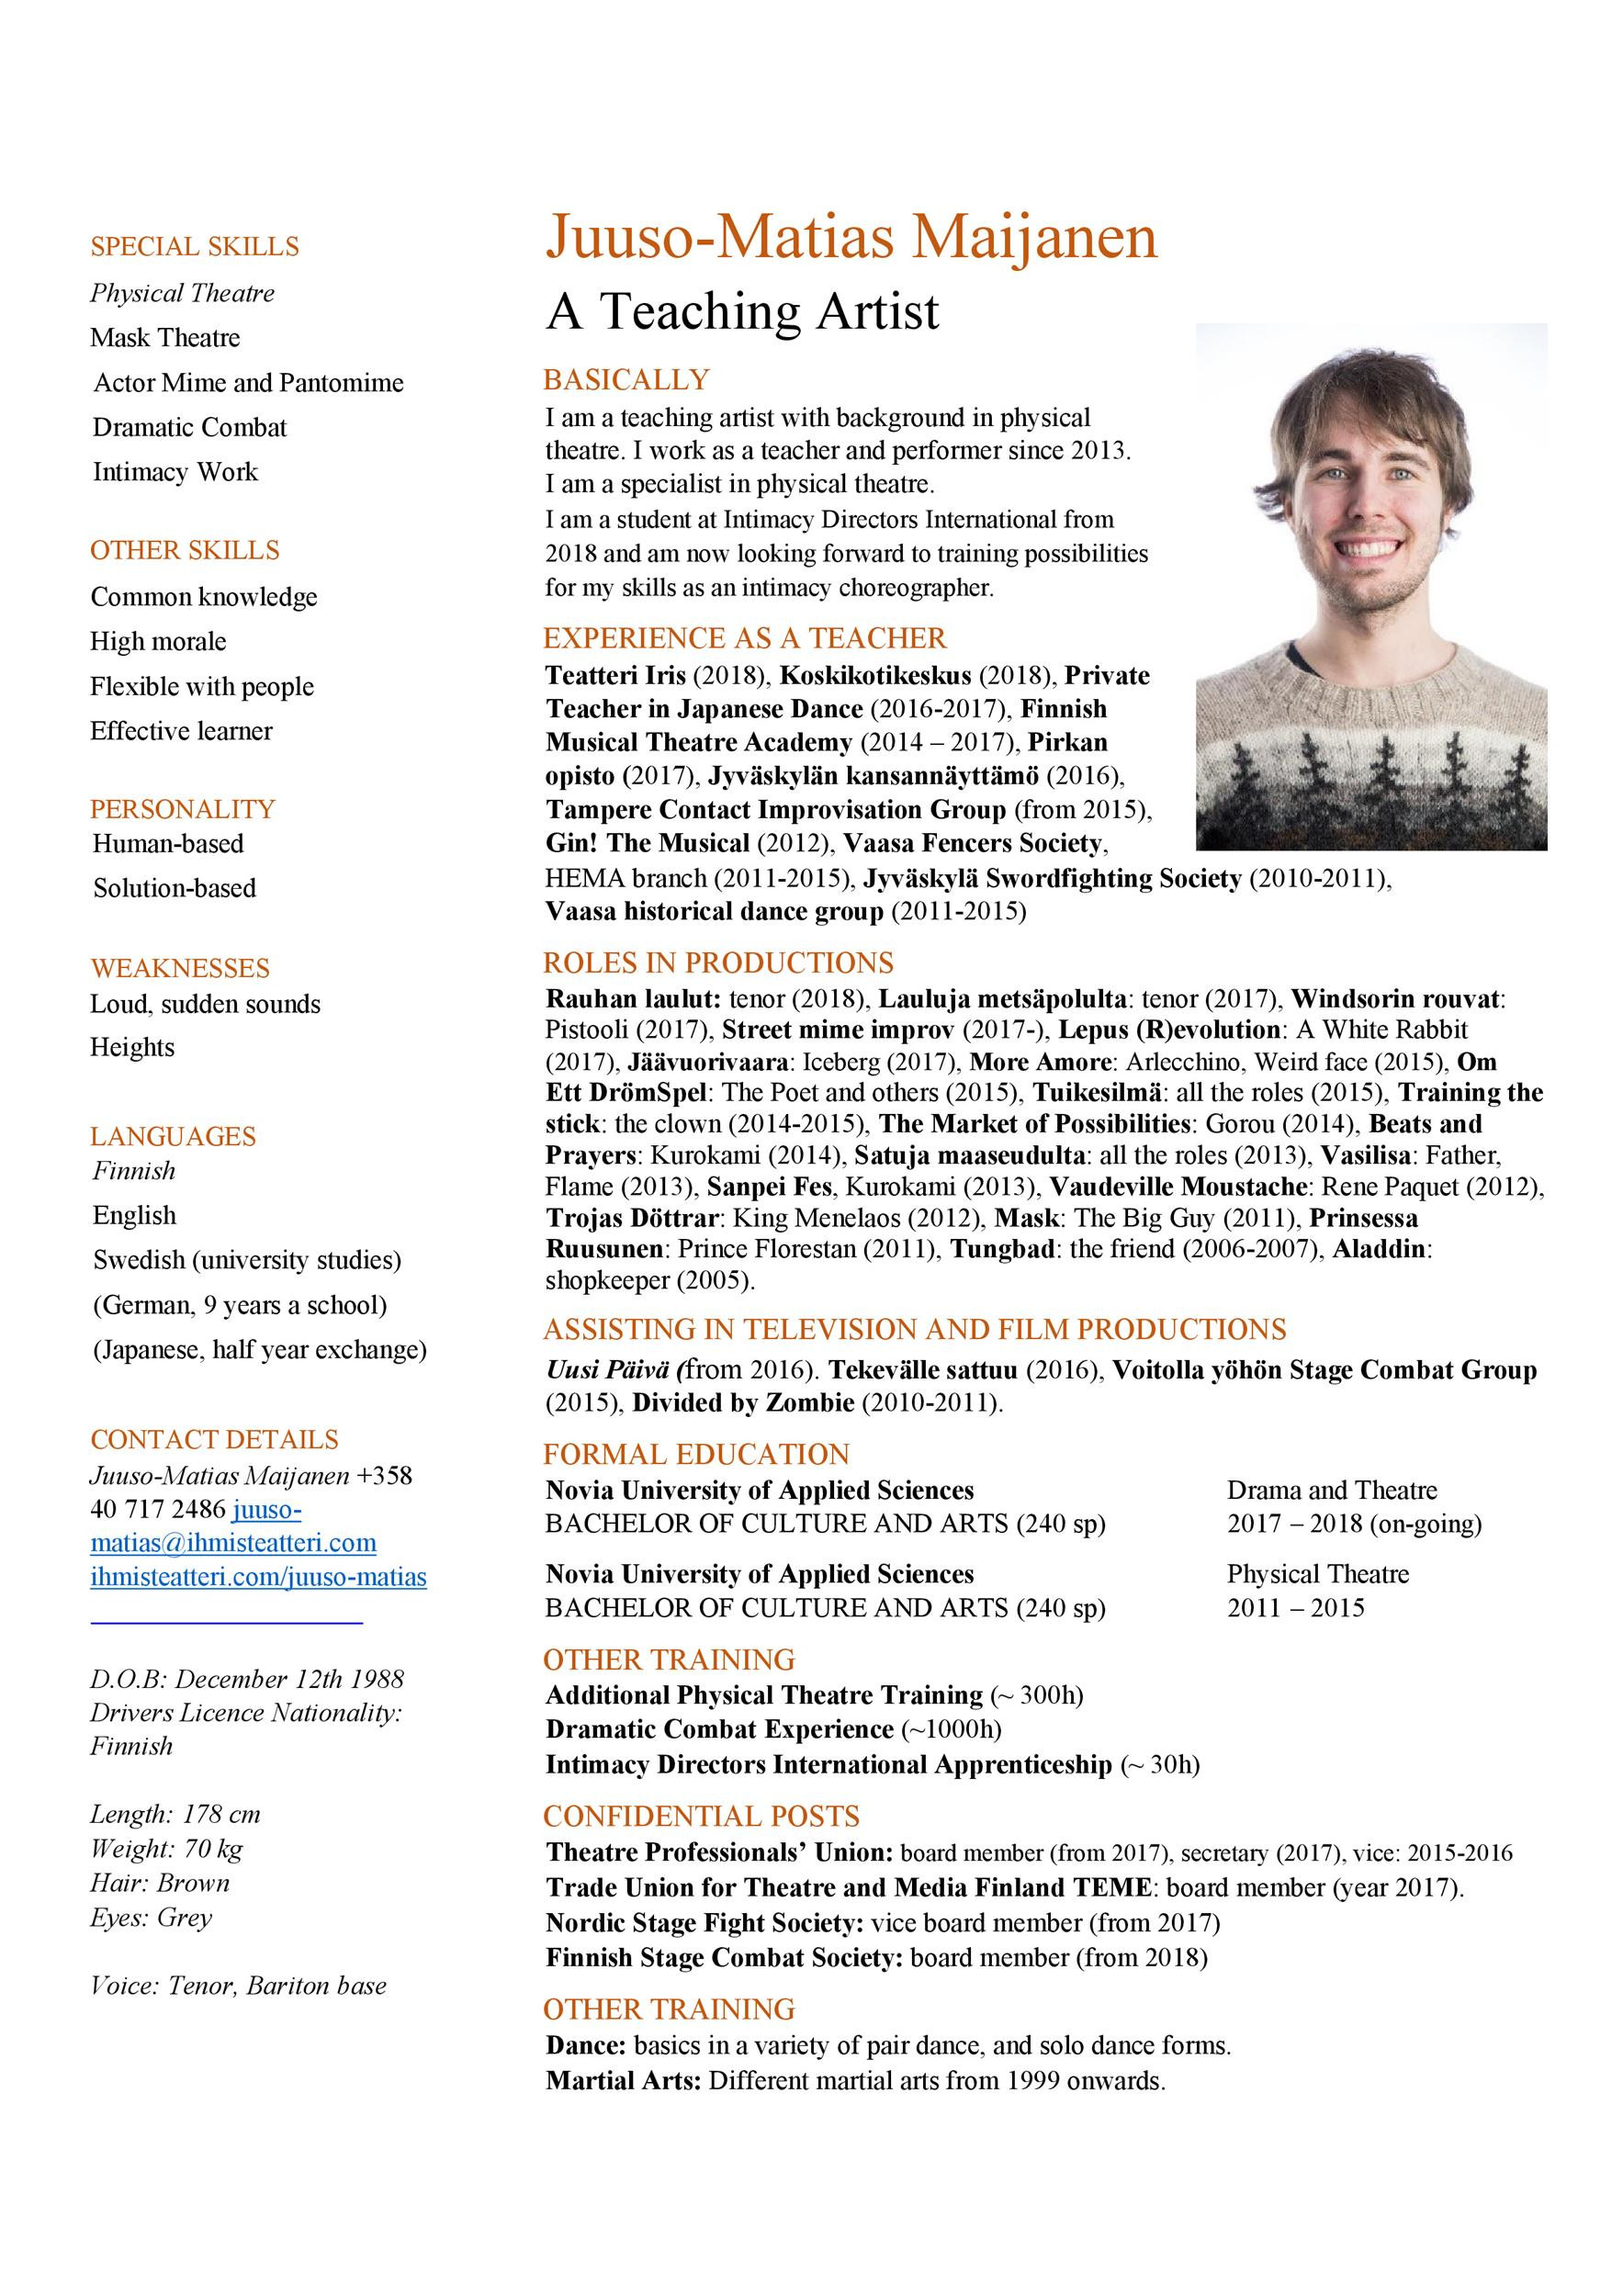 Sample Resume Right Out Of College theatre 50 Free Acting Resume Templates (word & Google Docs) á Templatelab